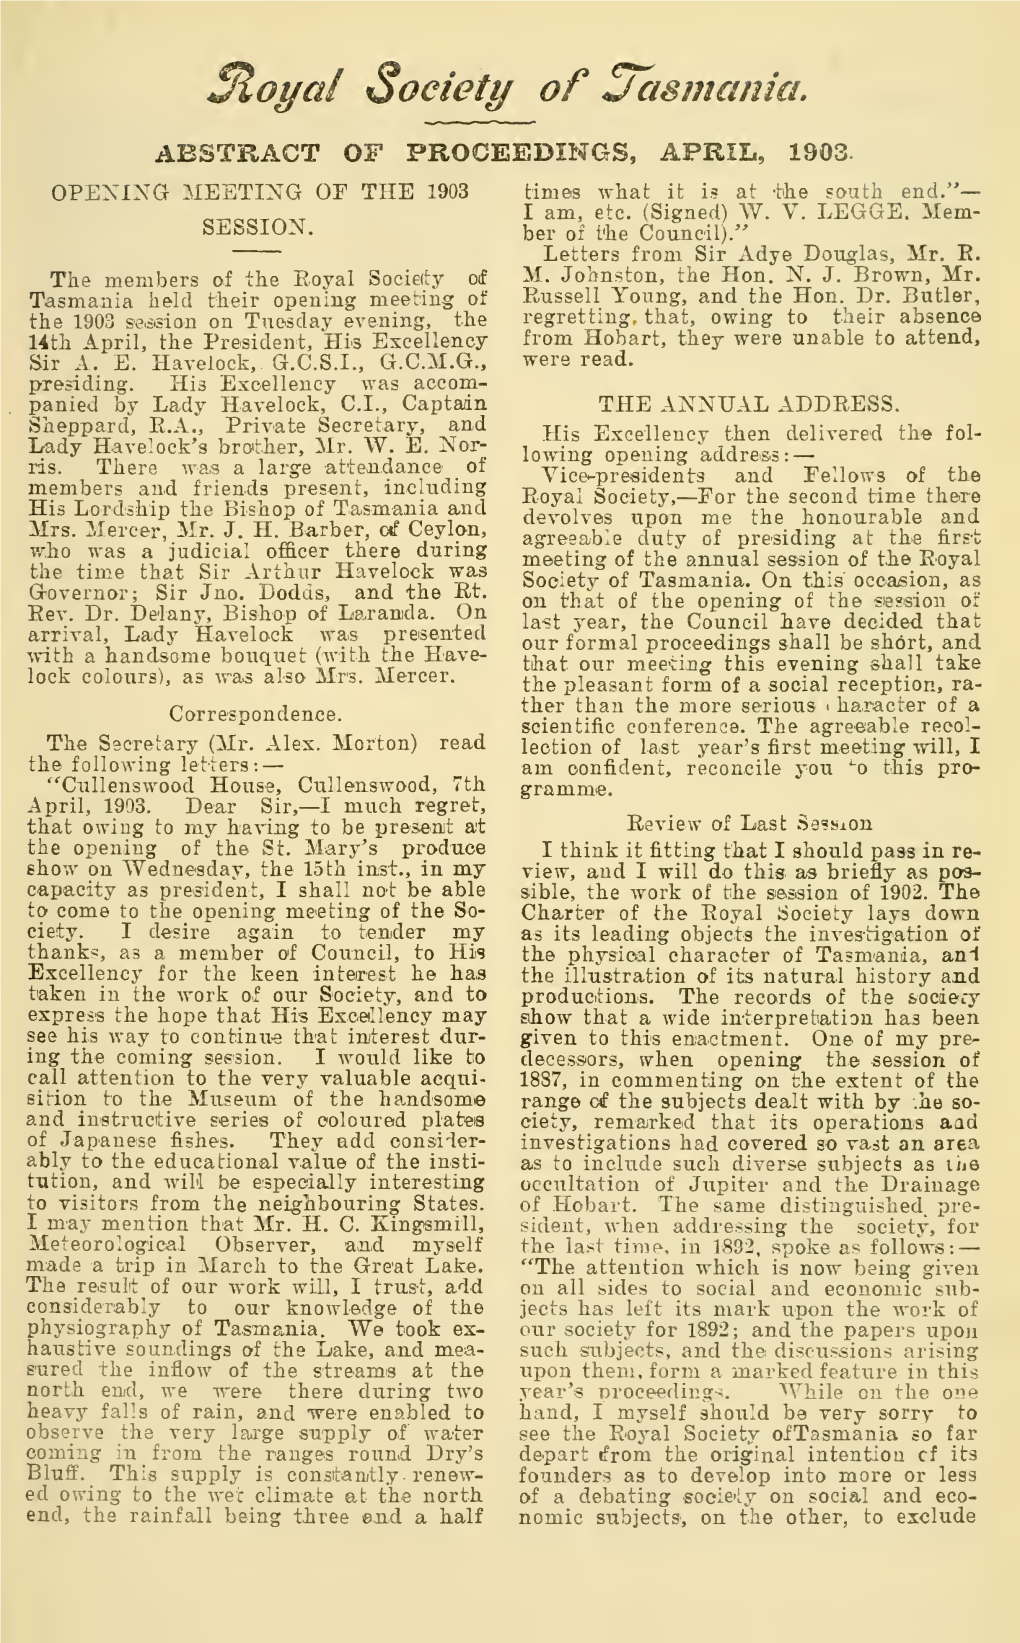 Abstract of Proceedings for the Month of April, 1903